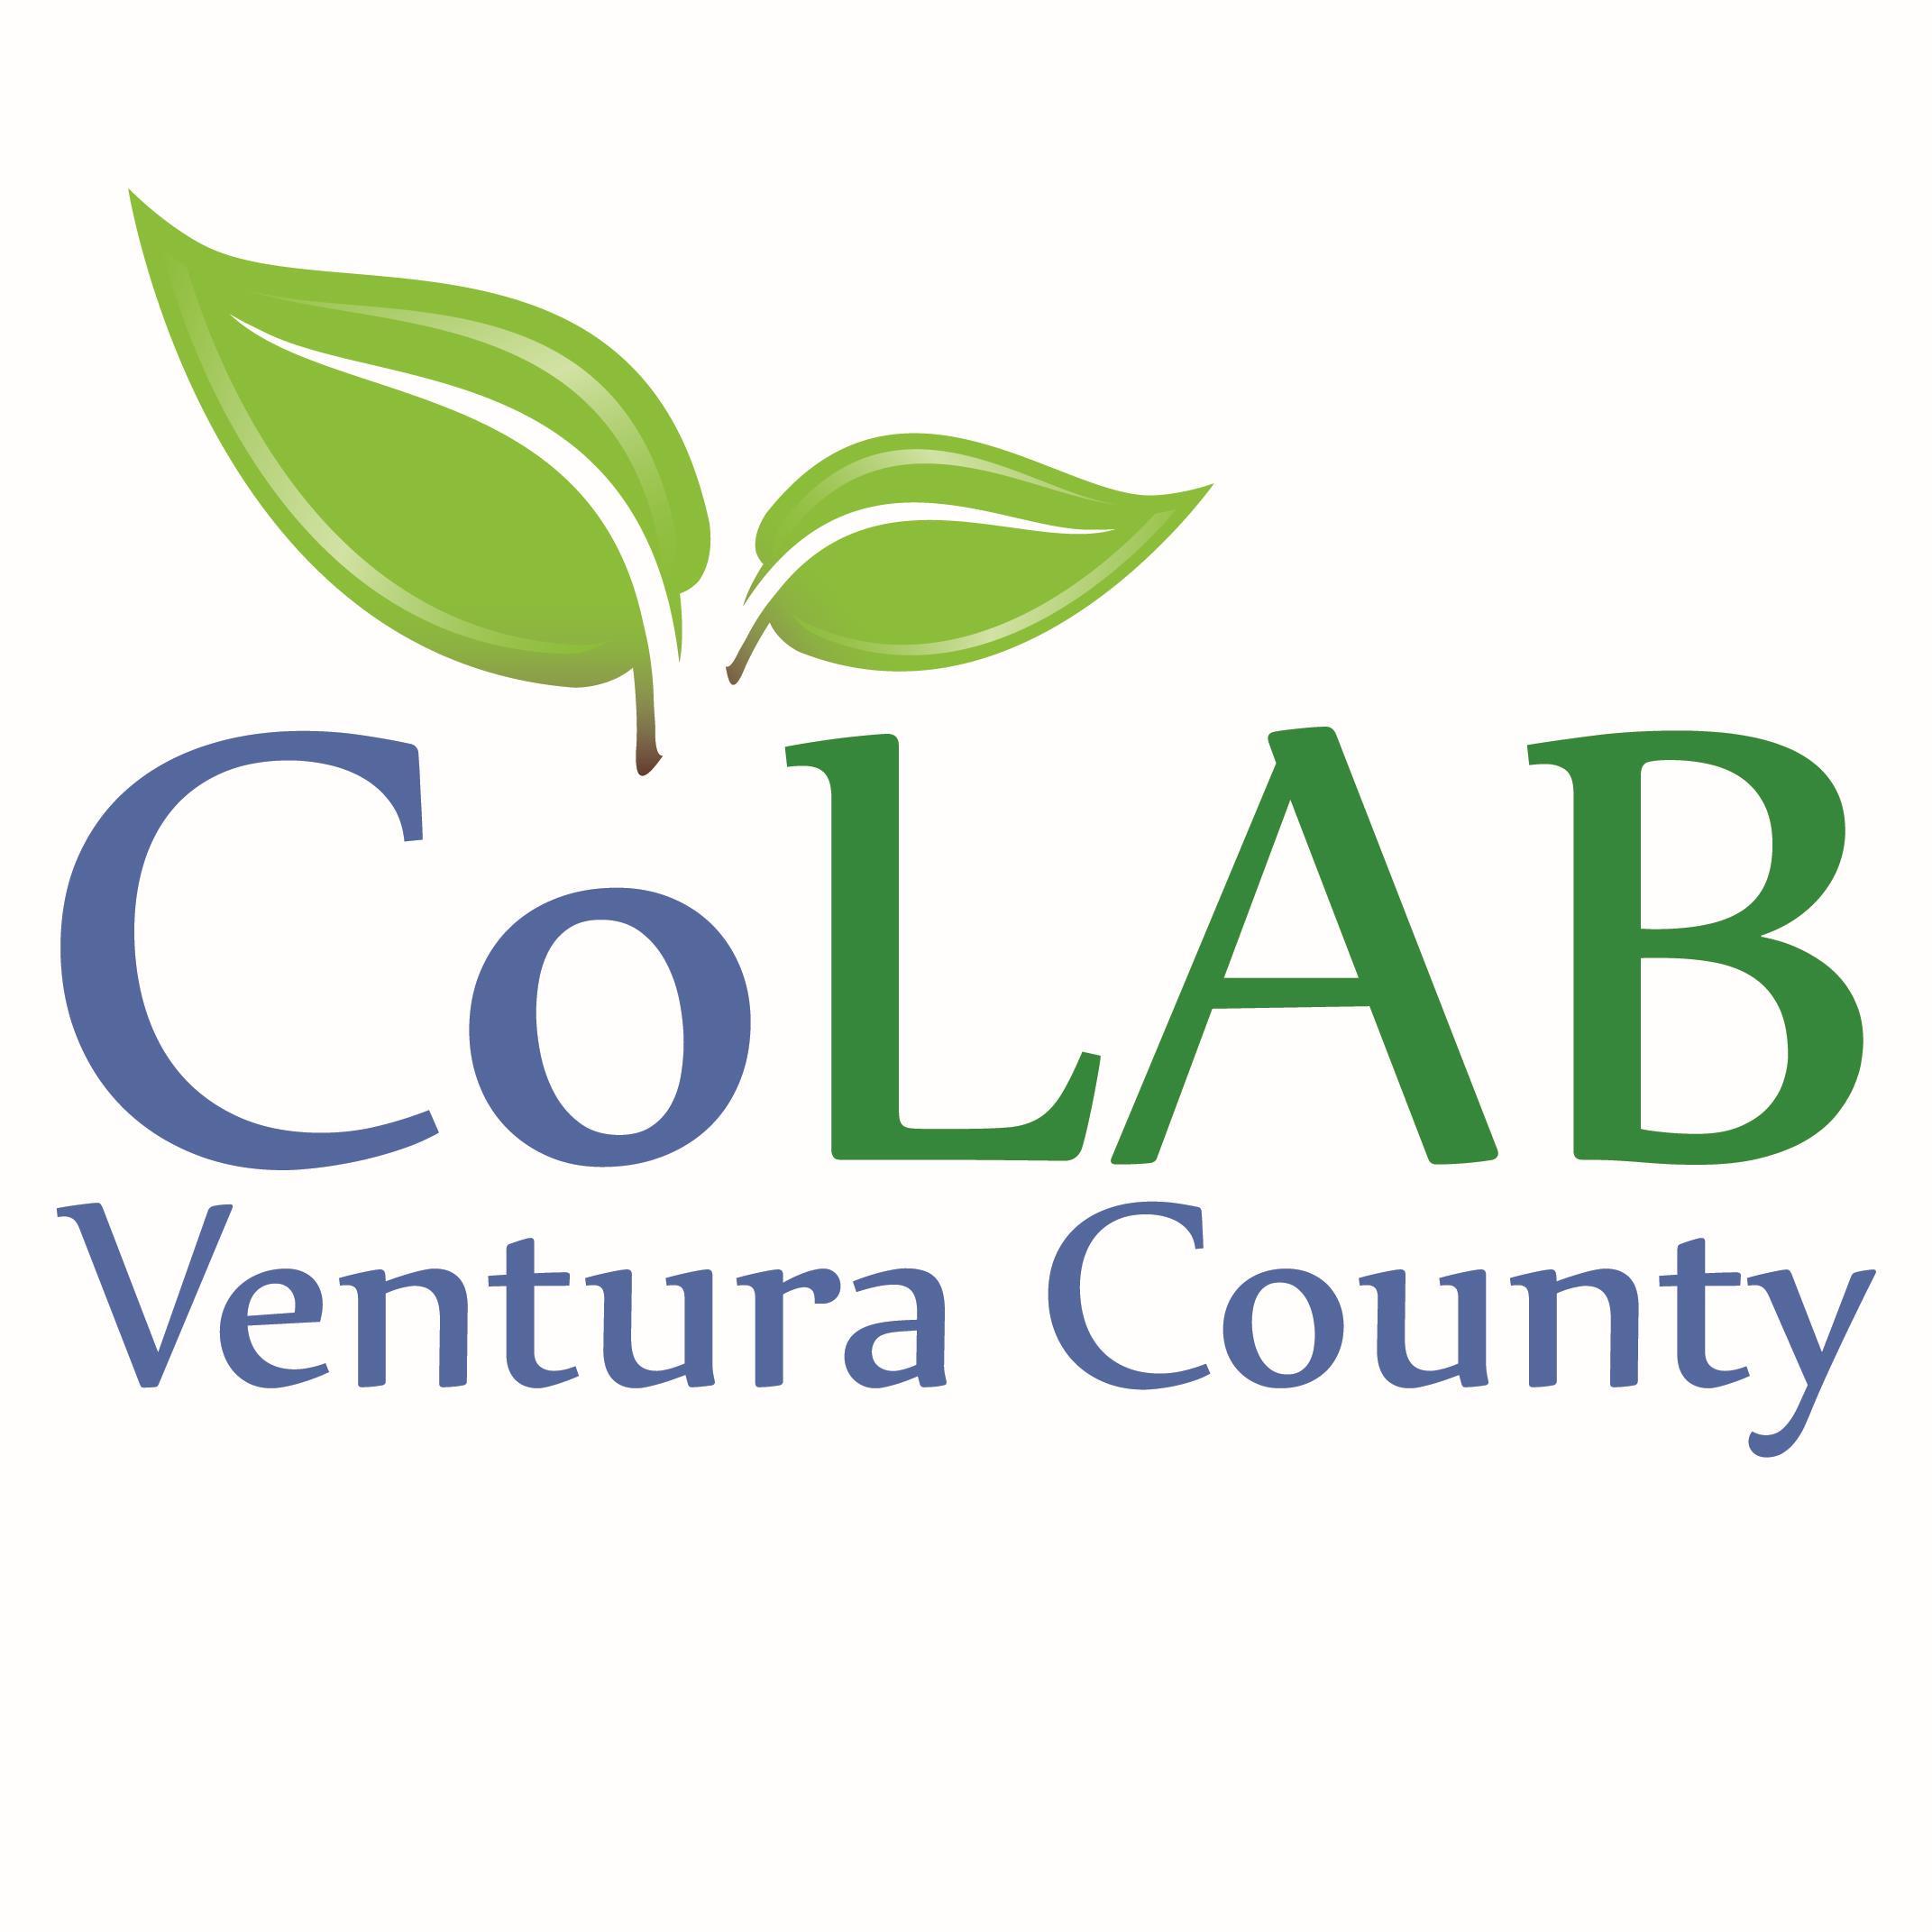 Coalition of Labor, Agriculture and Business.  Tired of unnecessary, burdensome regulations? Looking for common sense solutions? Join us! #VenturaCounty